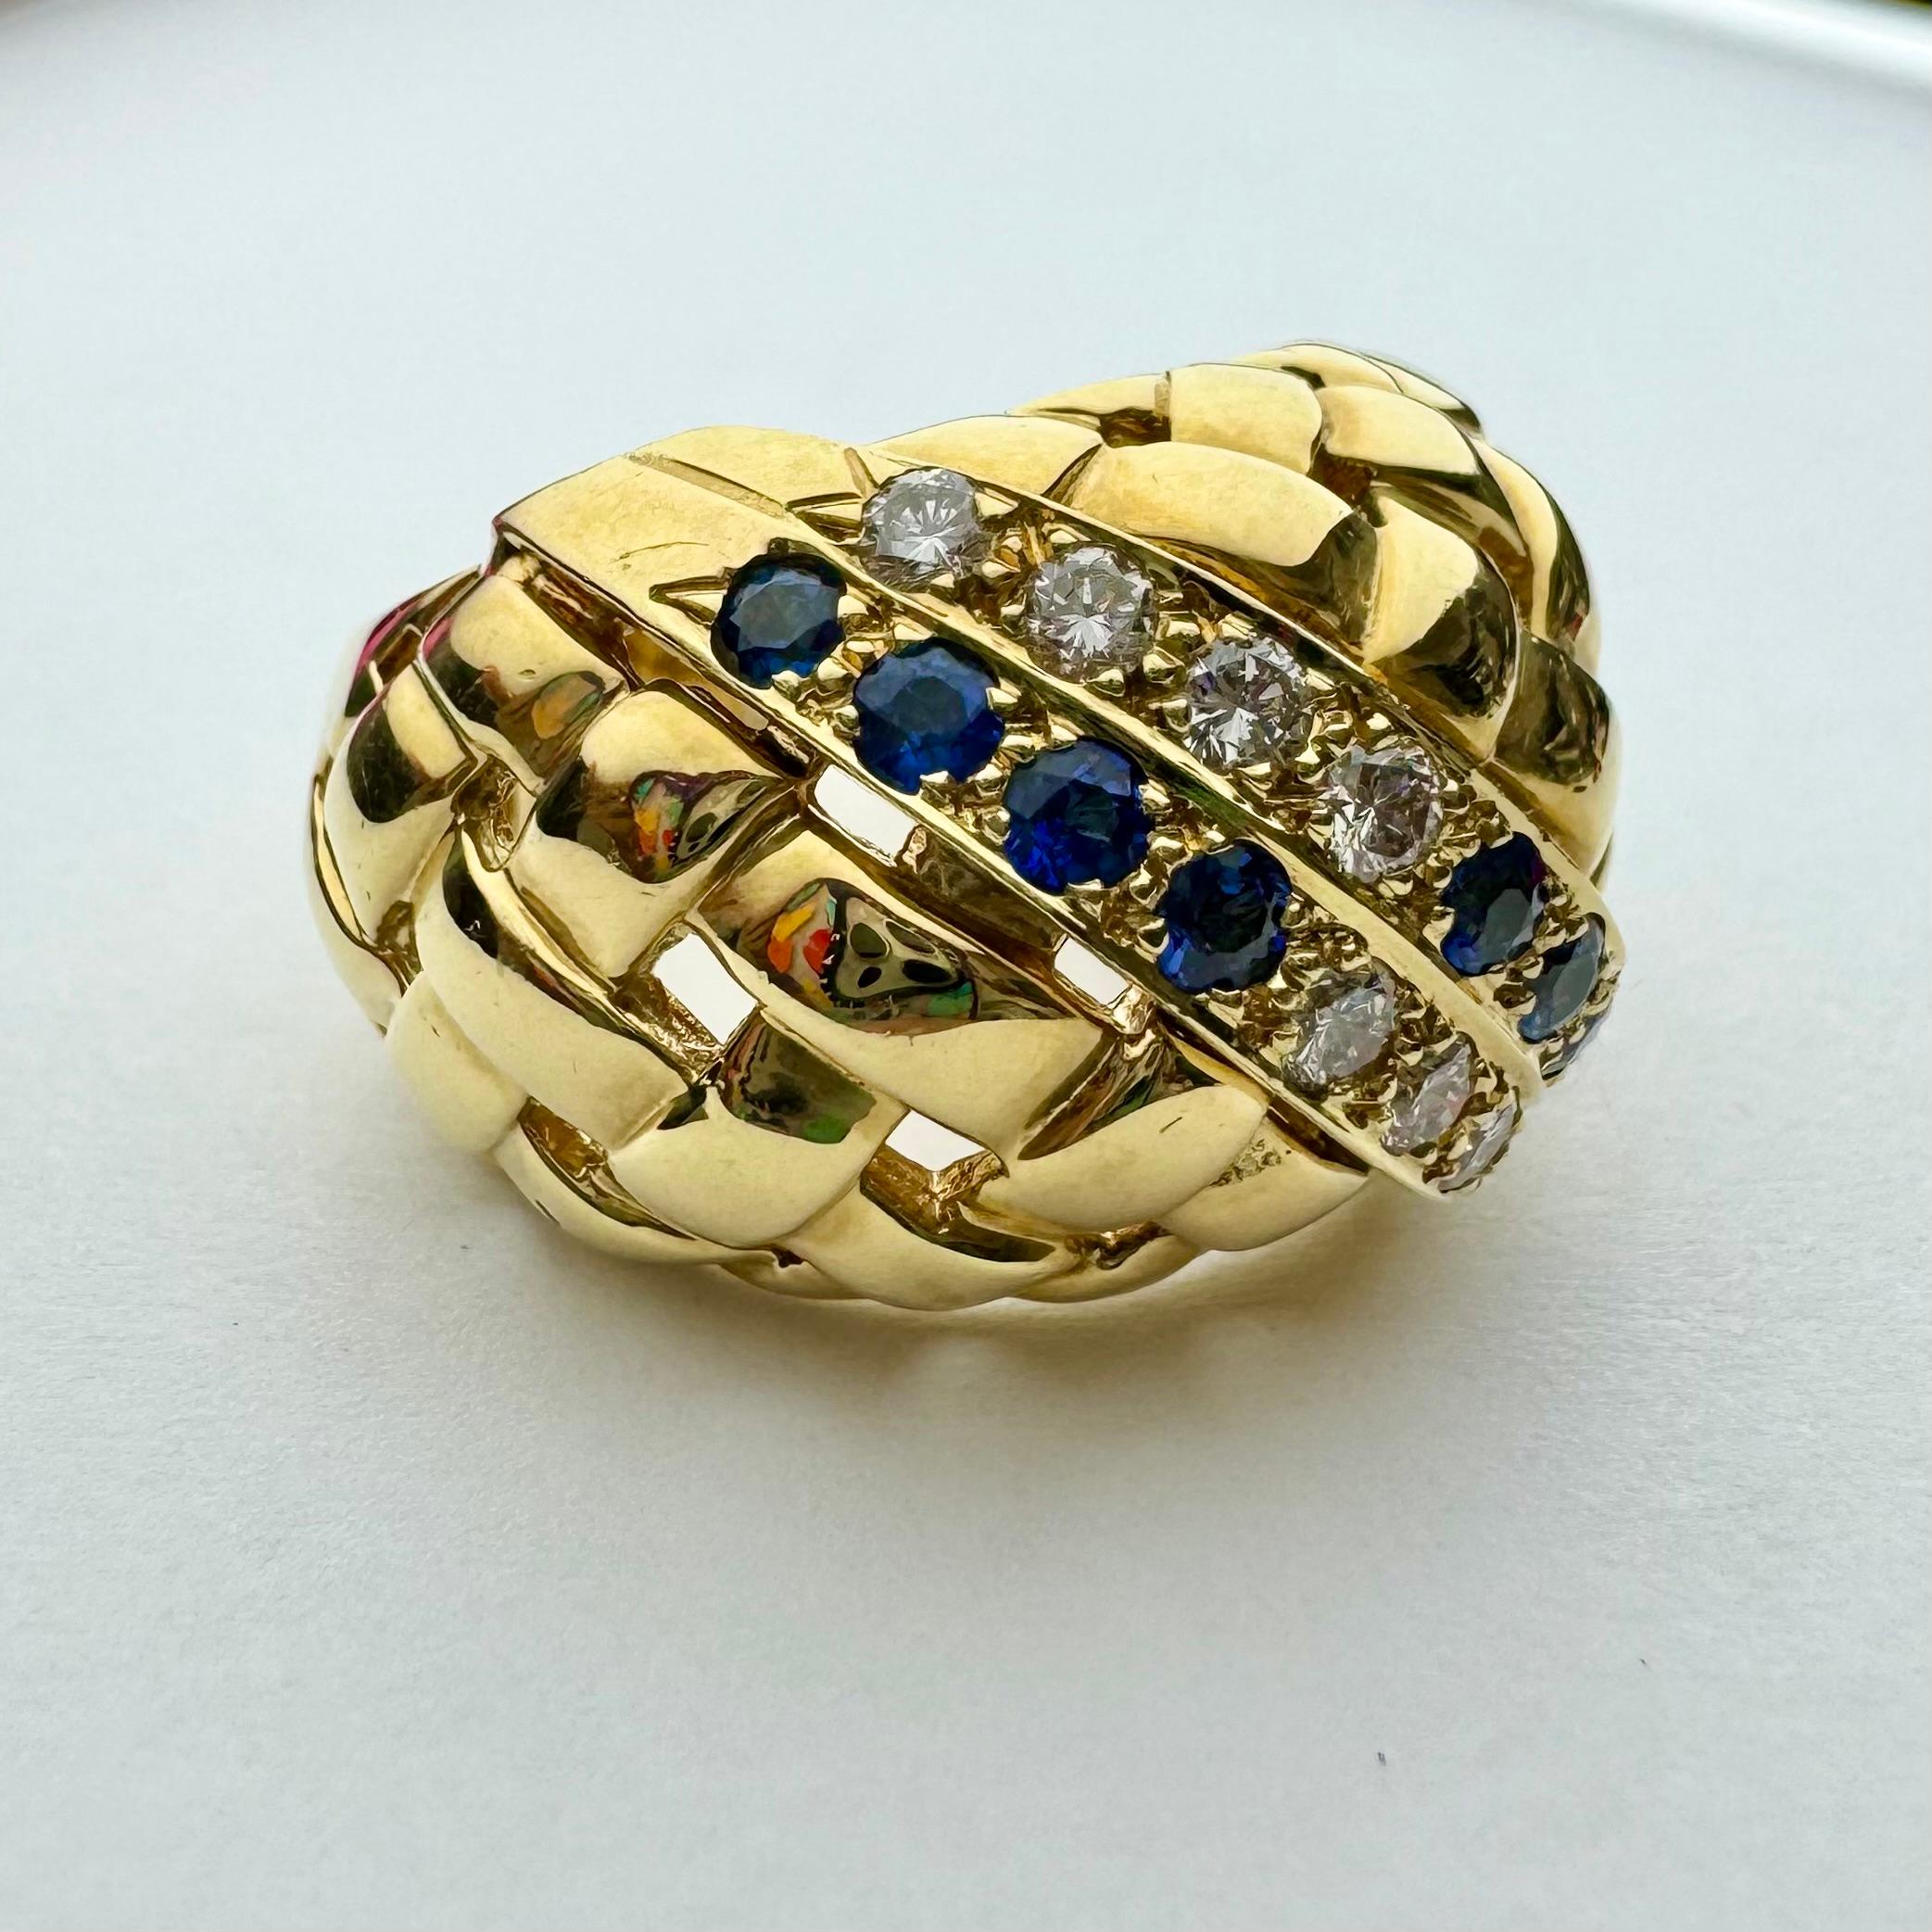 Elegant and stately dome sapphire and diamond ring set in solid 18k yellow gold. Ring features beautiful rich, golden woven design along with two band of gems adorned with dazzling blue sapphires and sparkling white diamonds. There are 8 white,